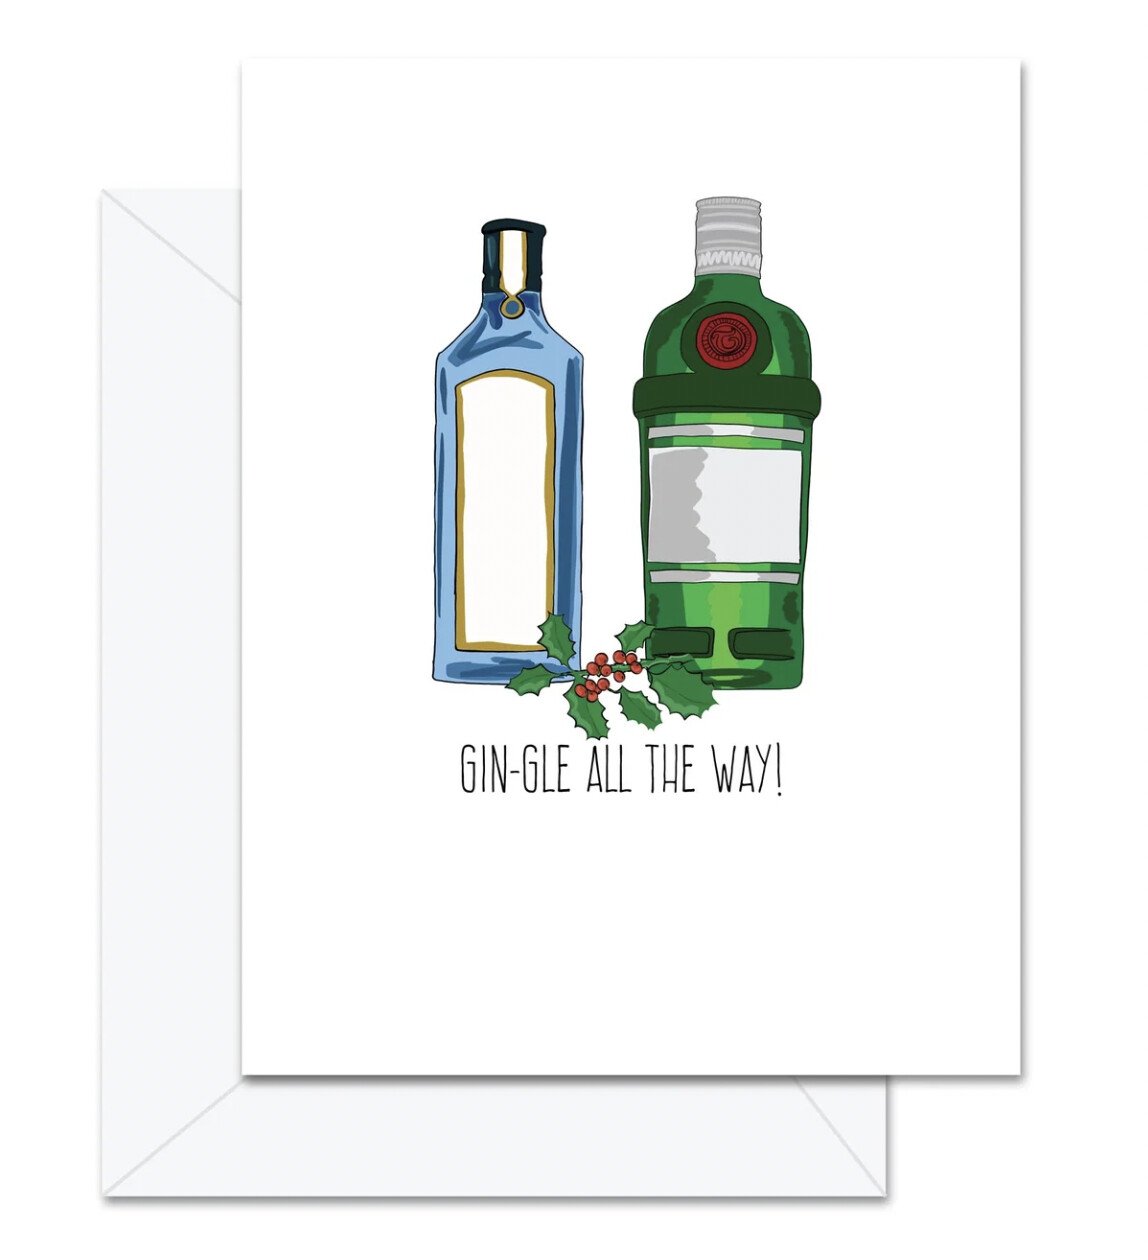 Gin-gle All The Way!